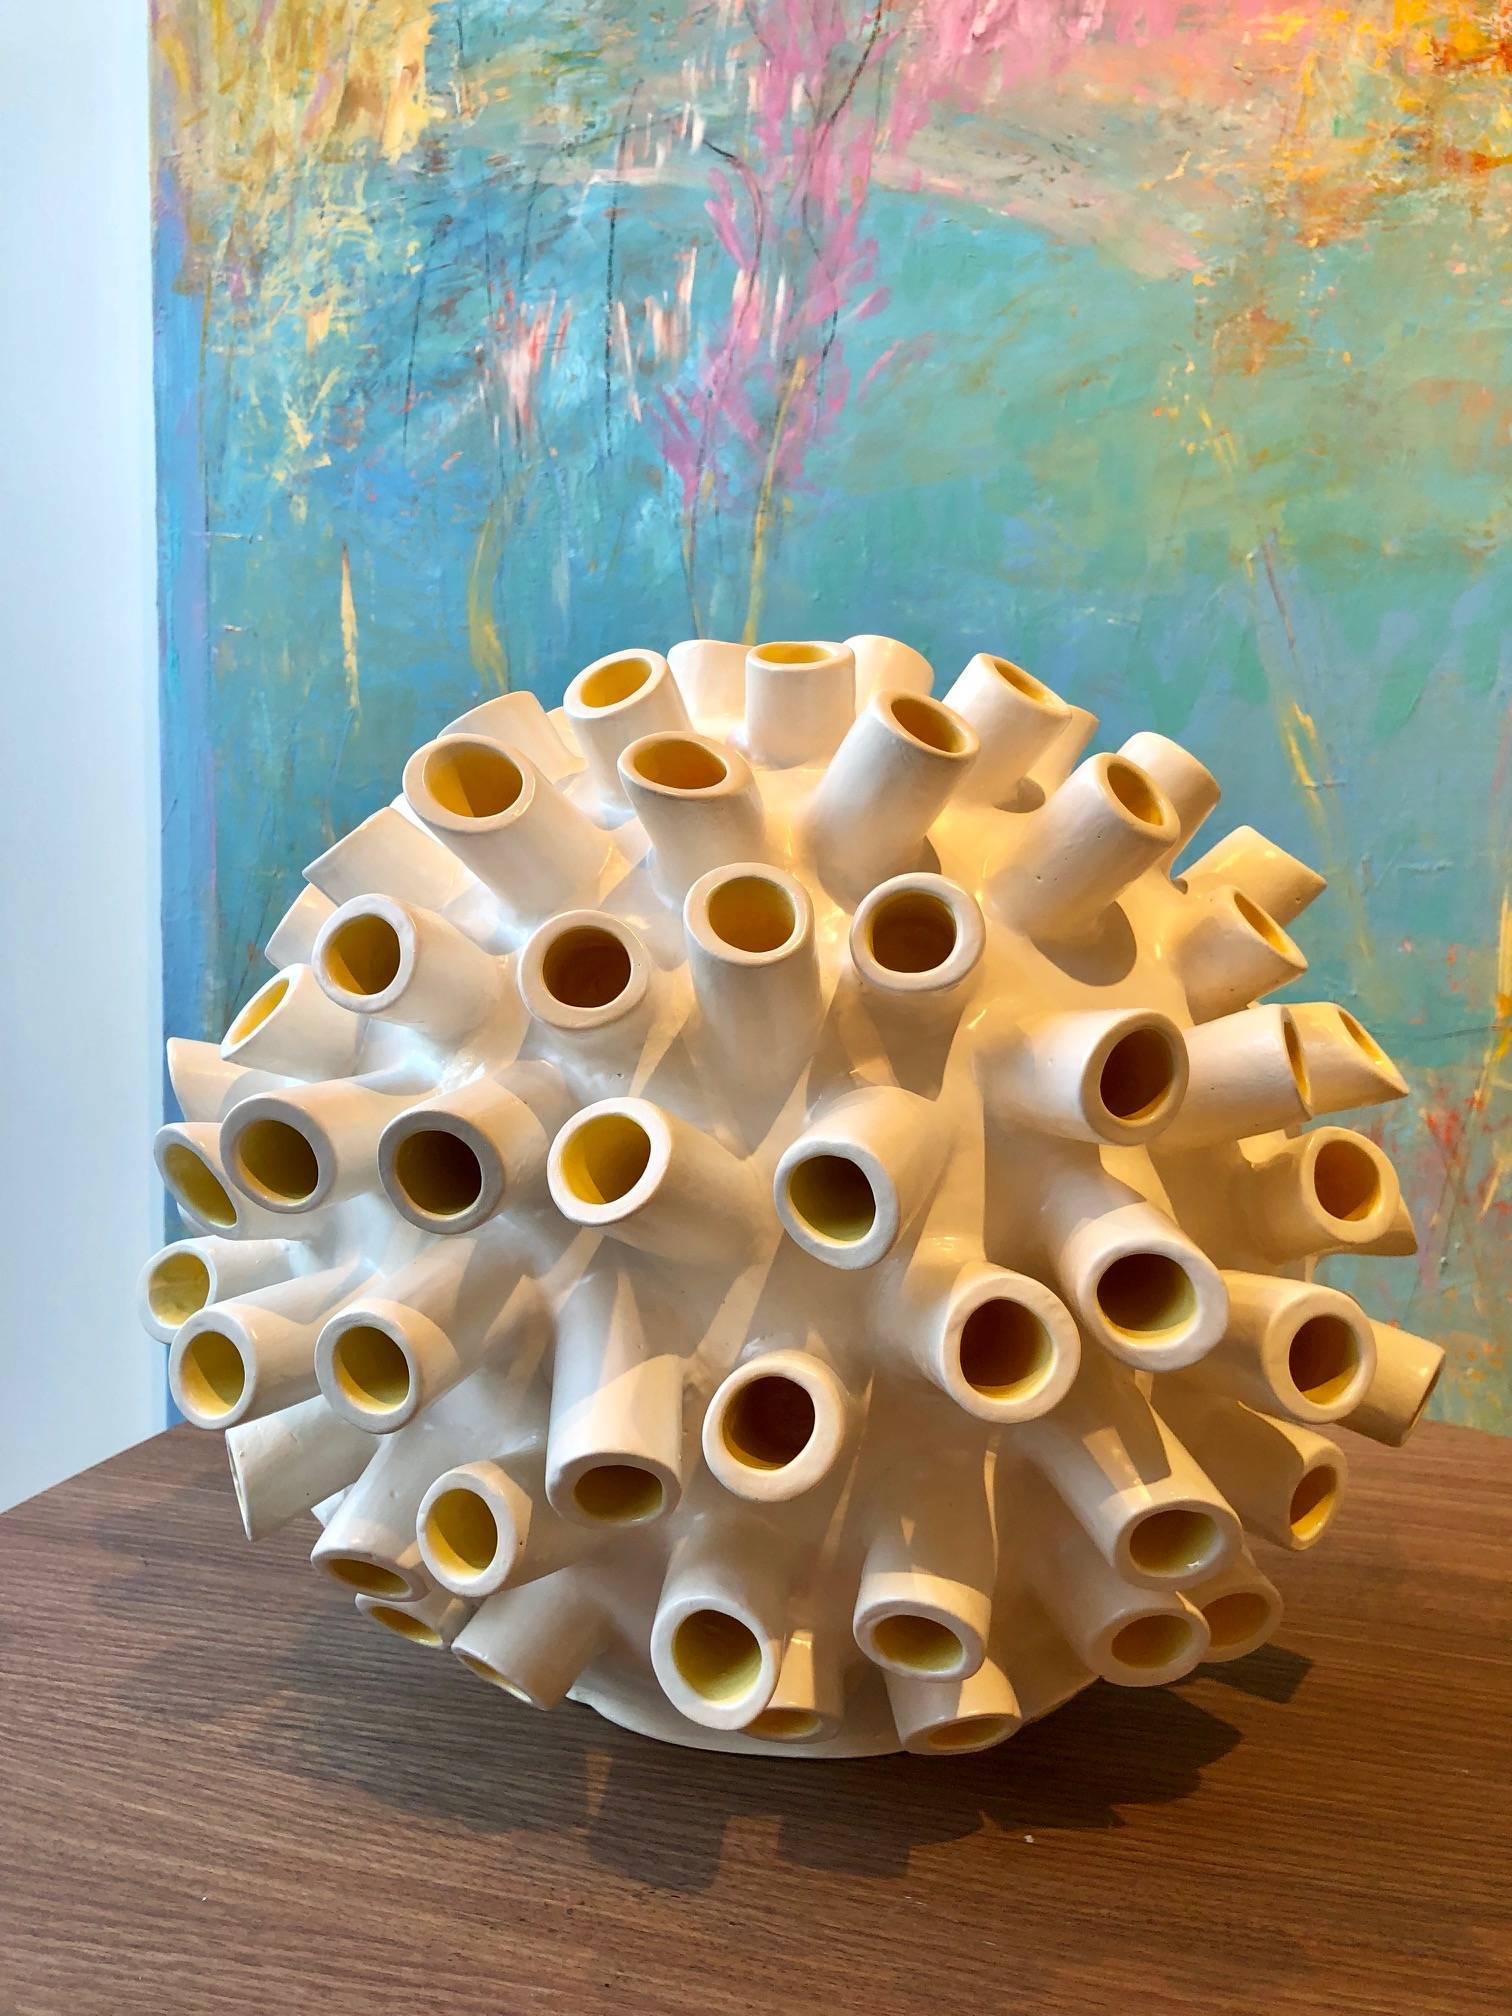 Razz-Ma-Tazz No. II / ceramic sculpture in white and yellow - Gray Abstract Sculpture by Jane B. Grimm